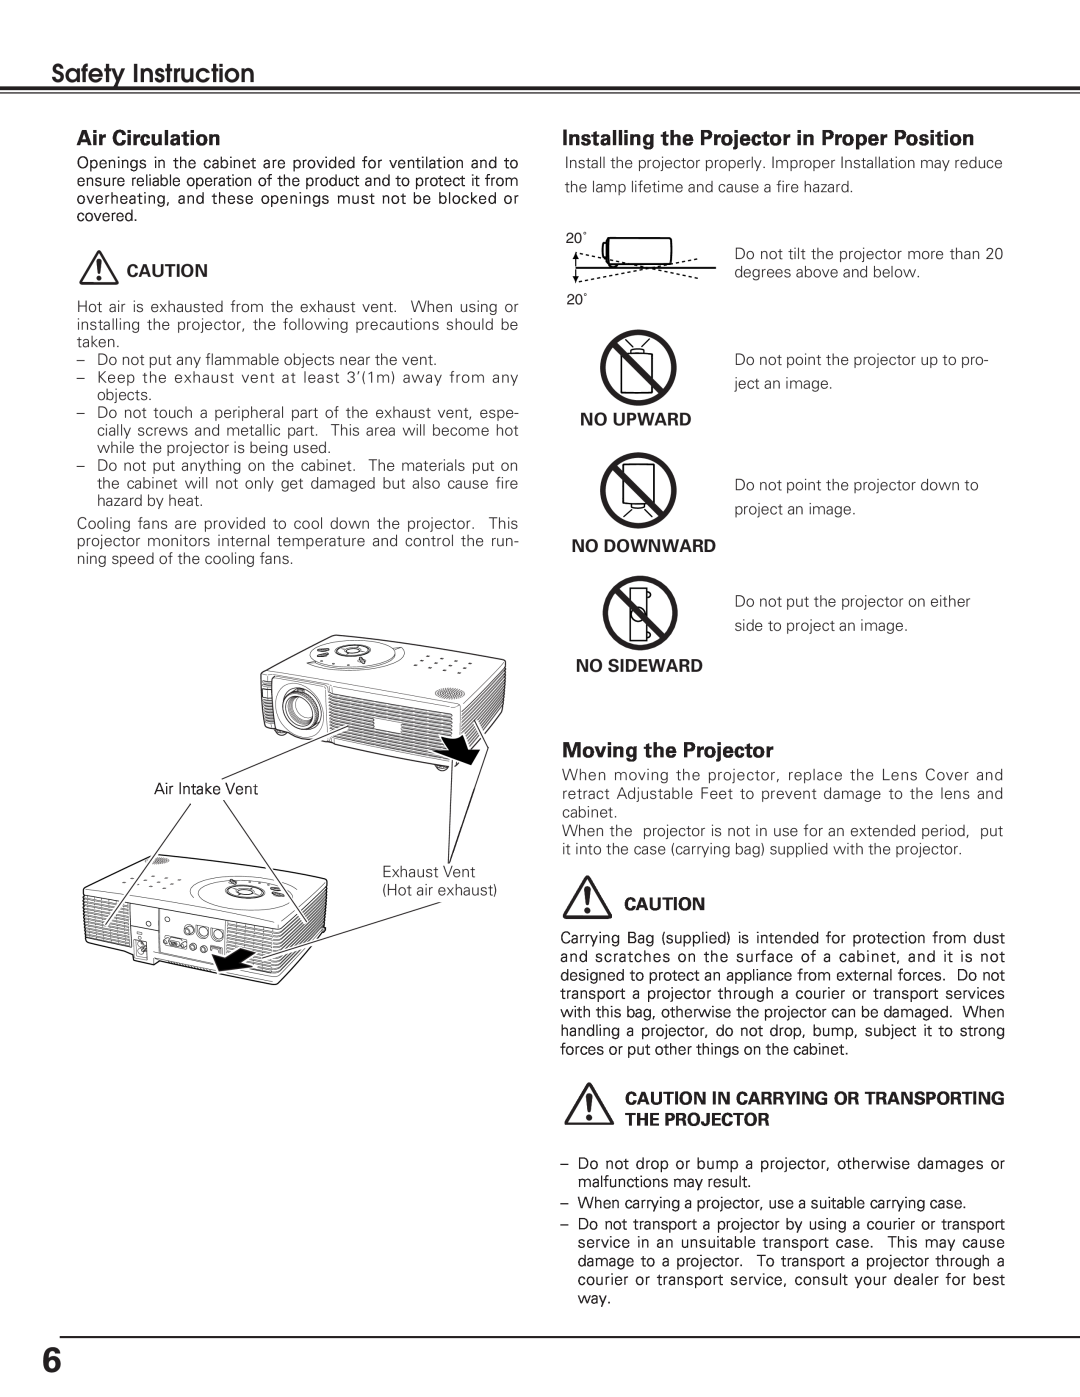 Eiki LC-SD12 Safety Instruction, Air Circulation, Installing the Projector in Proper Position, Moving the Projector 